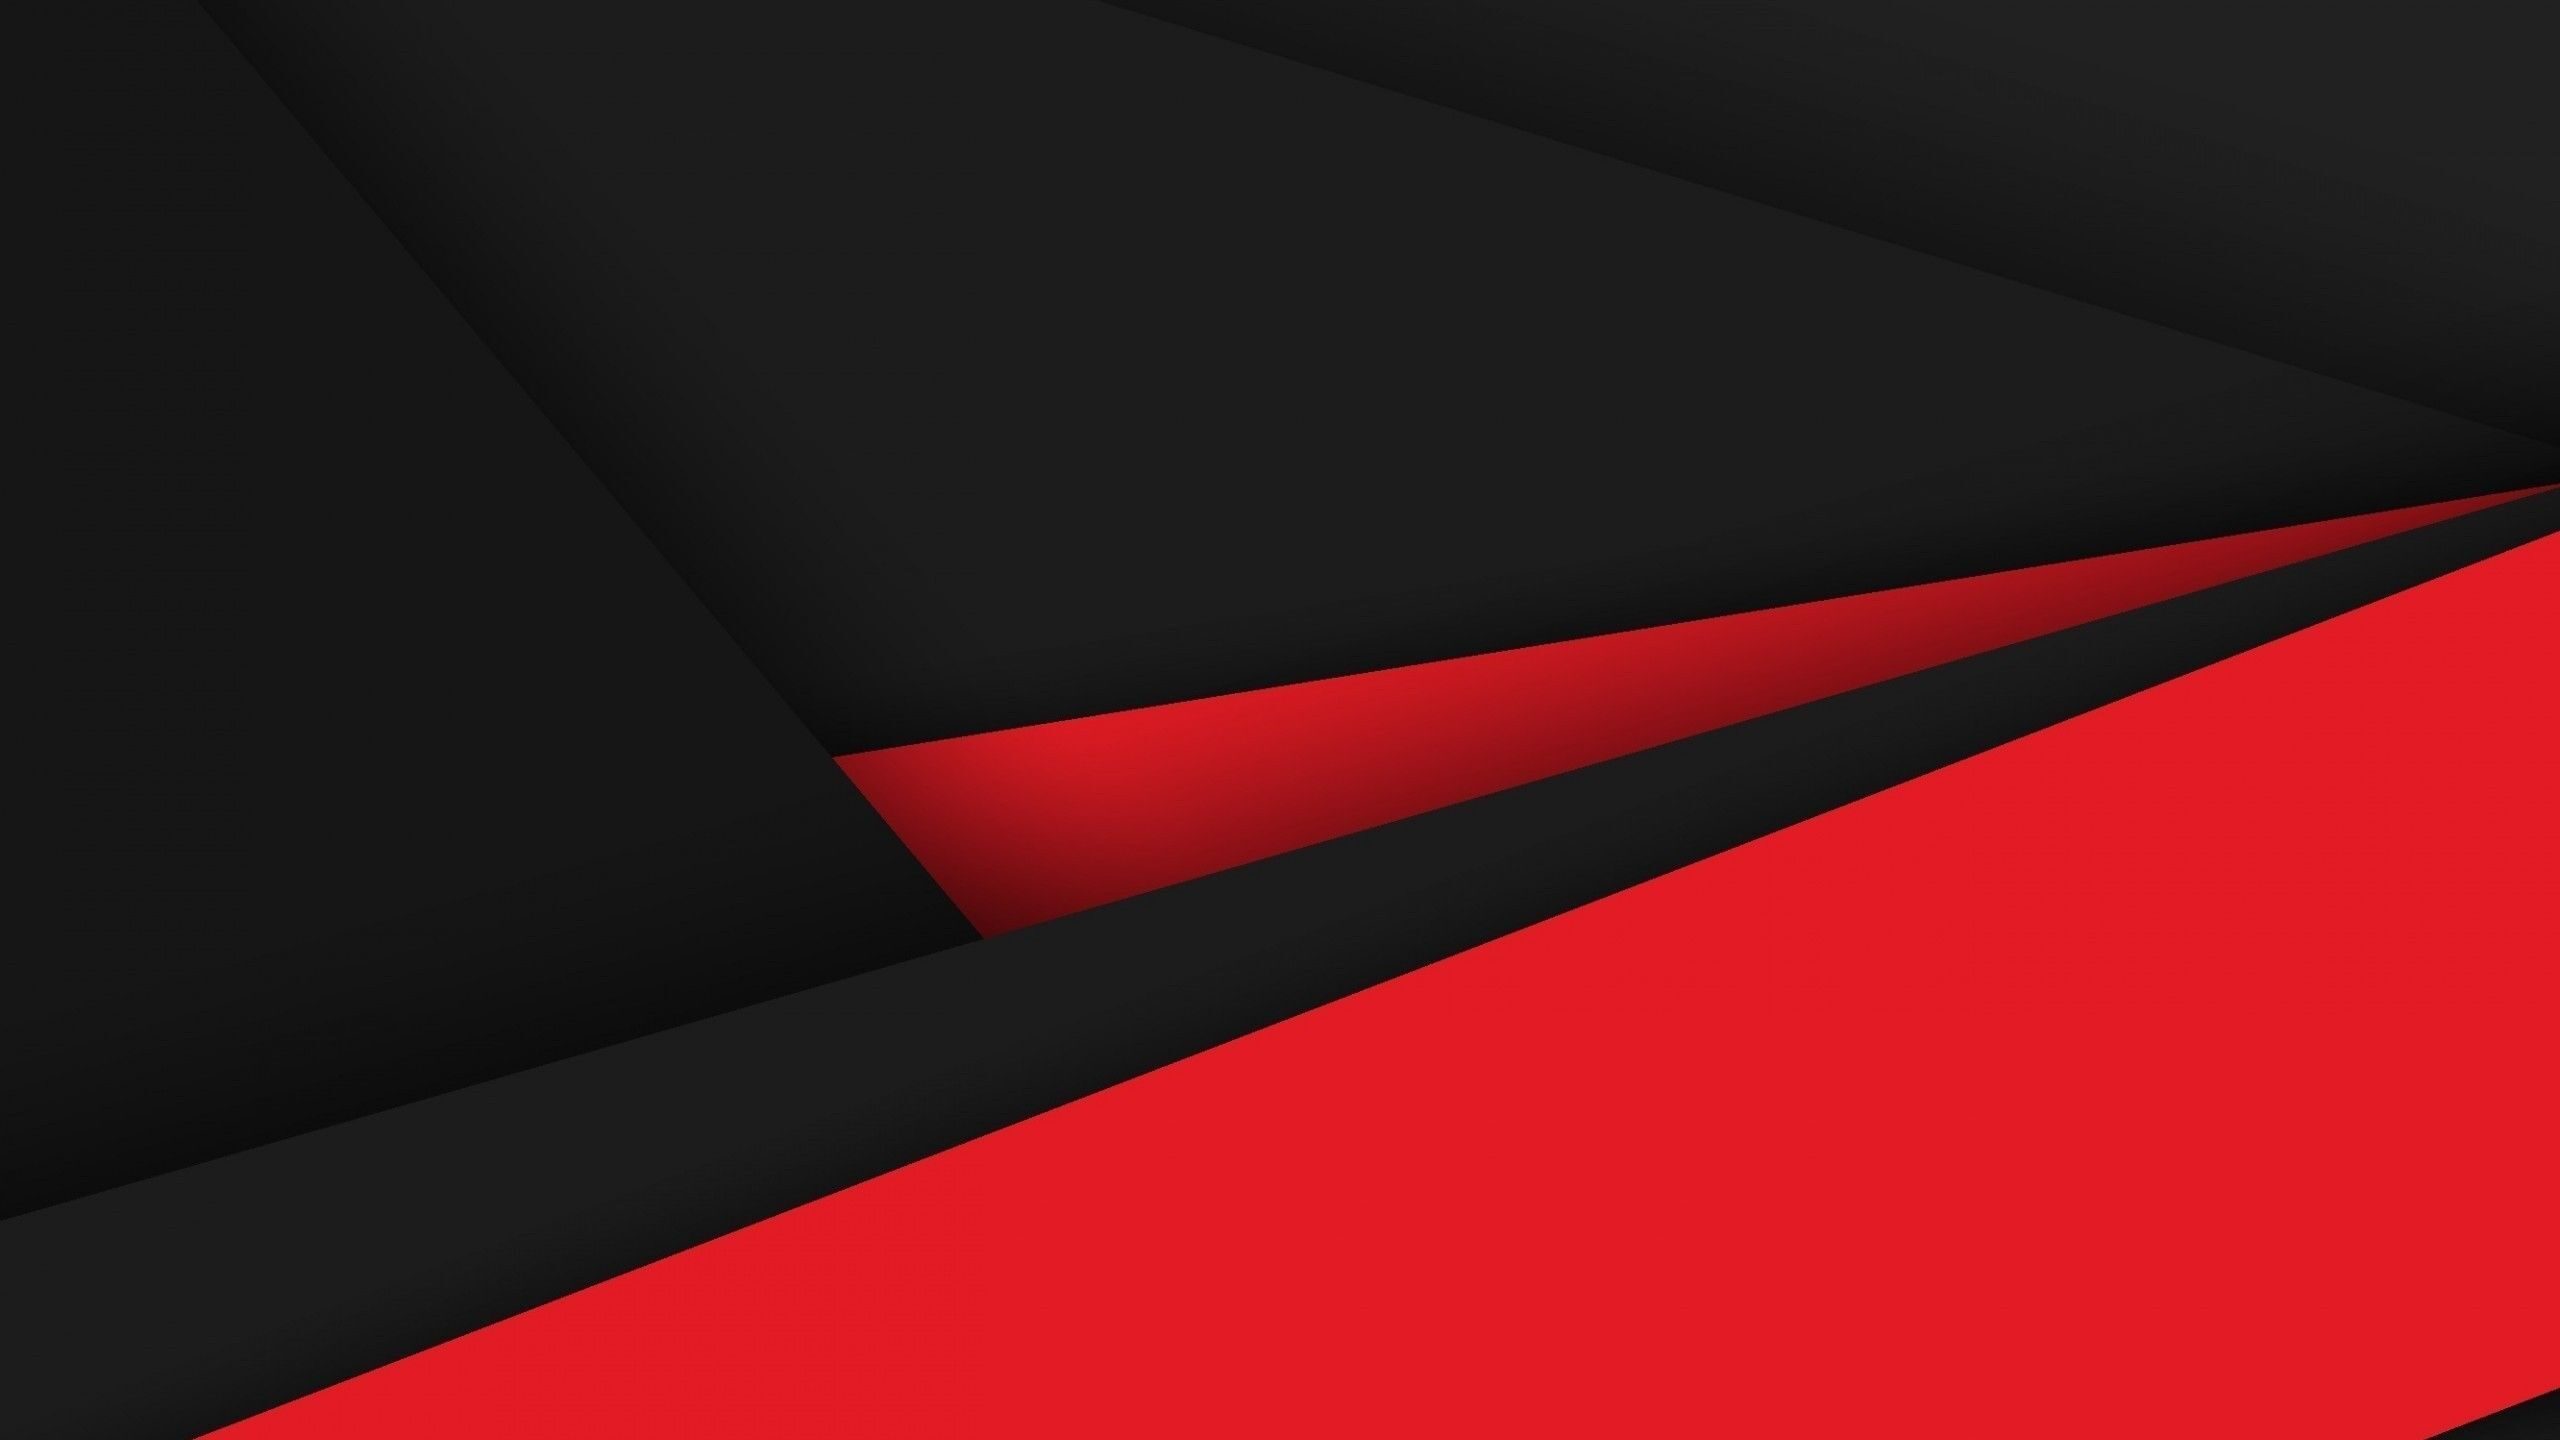 Black and Red Wallpaper - NawPic